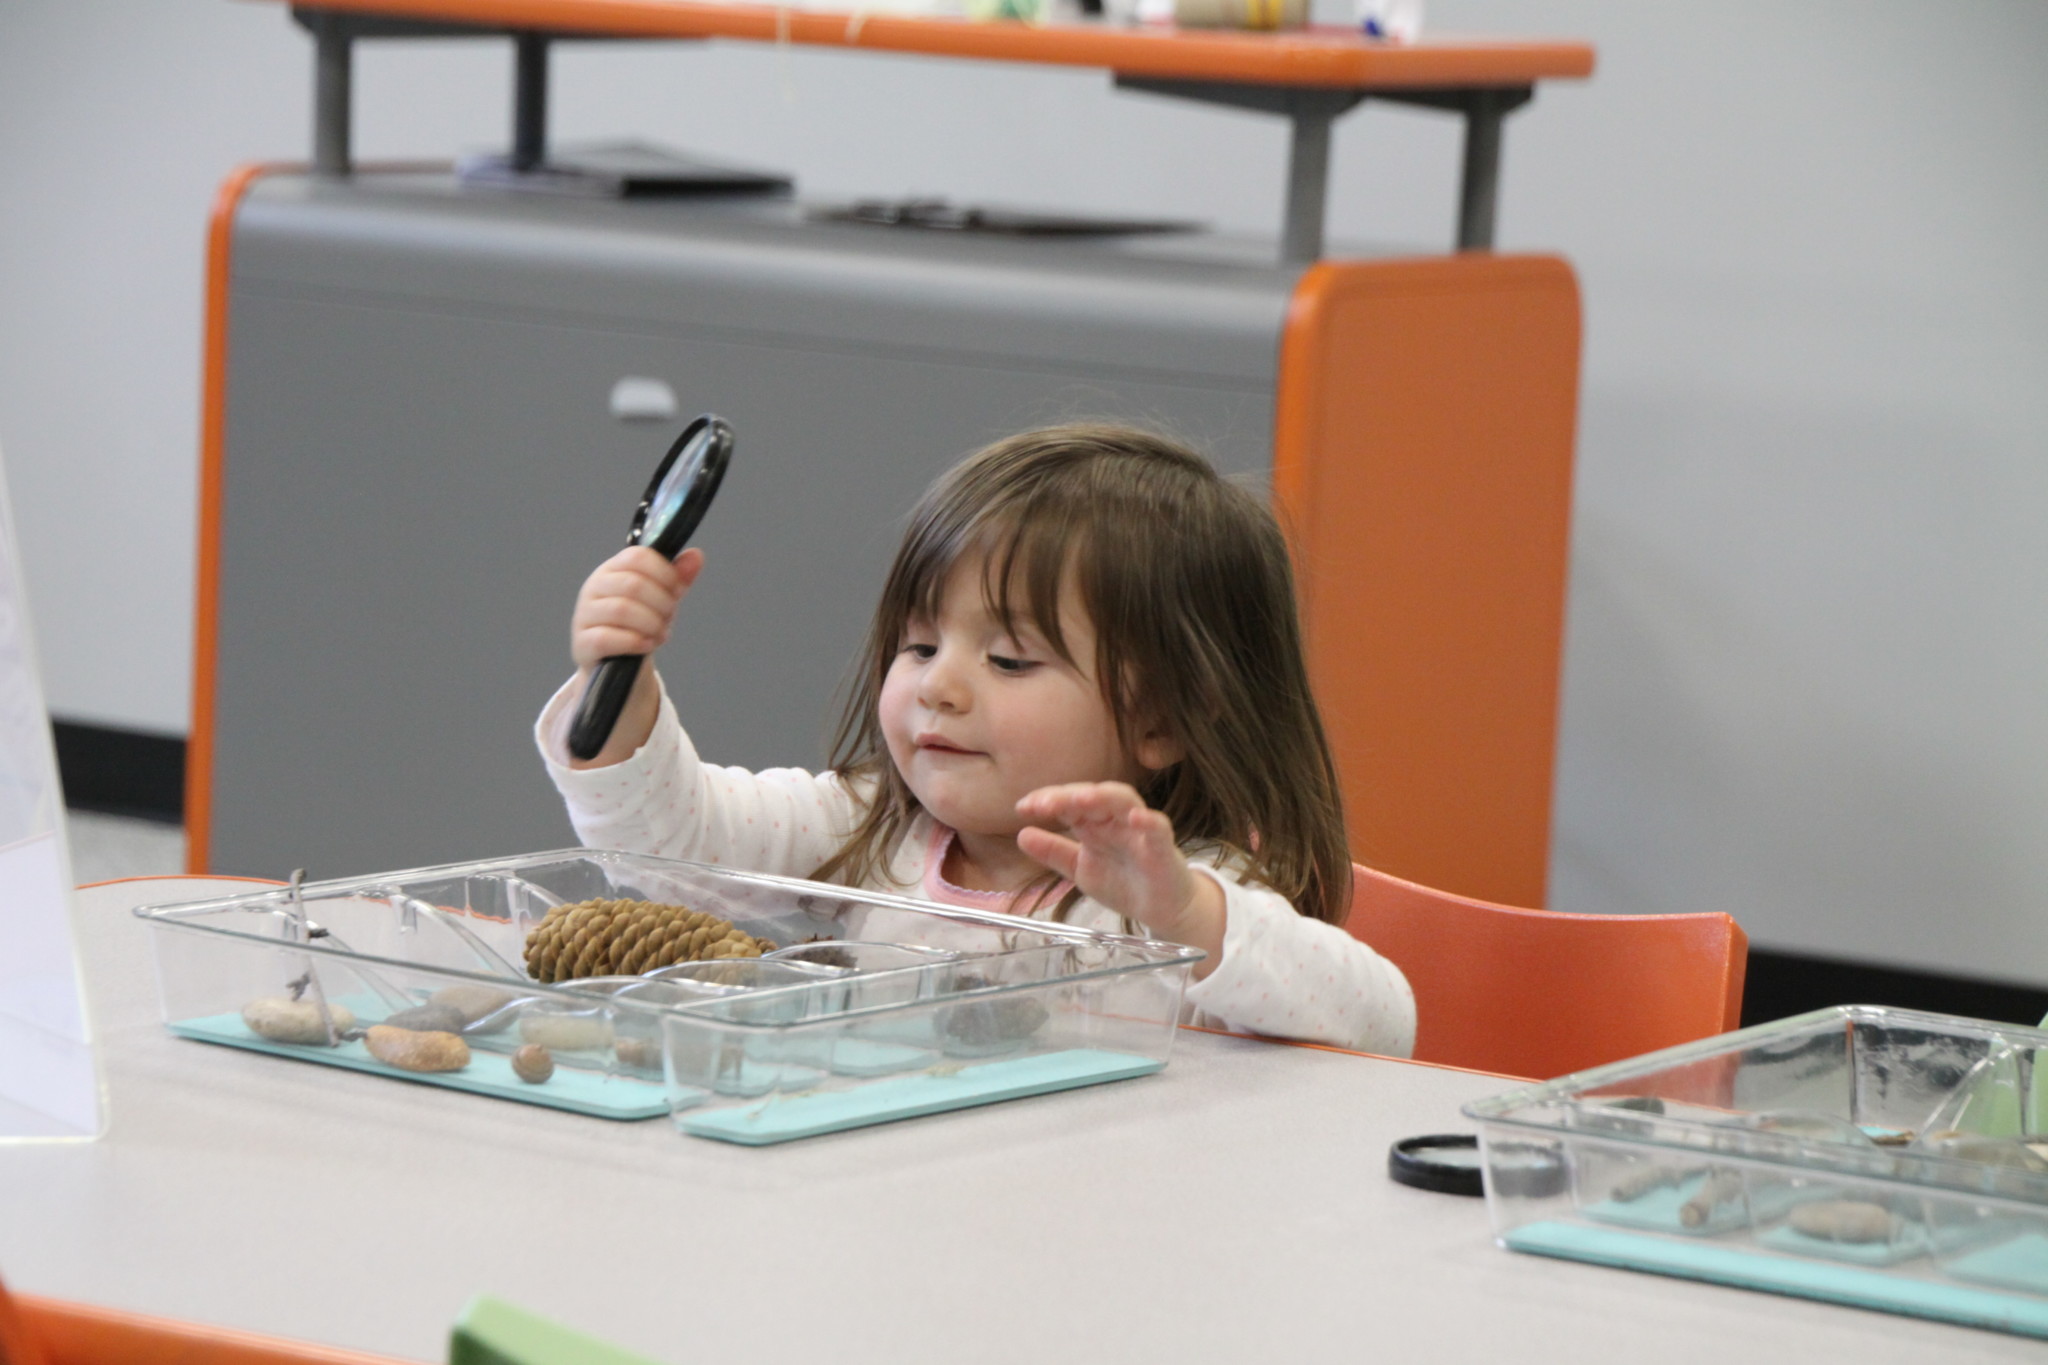 STEM Free Day at the Building for Kids gives families the chance to experiment!